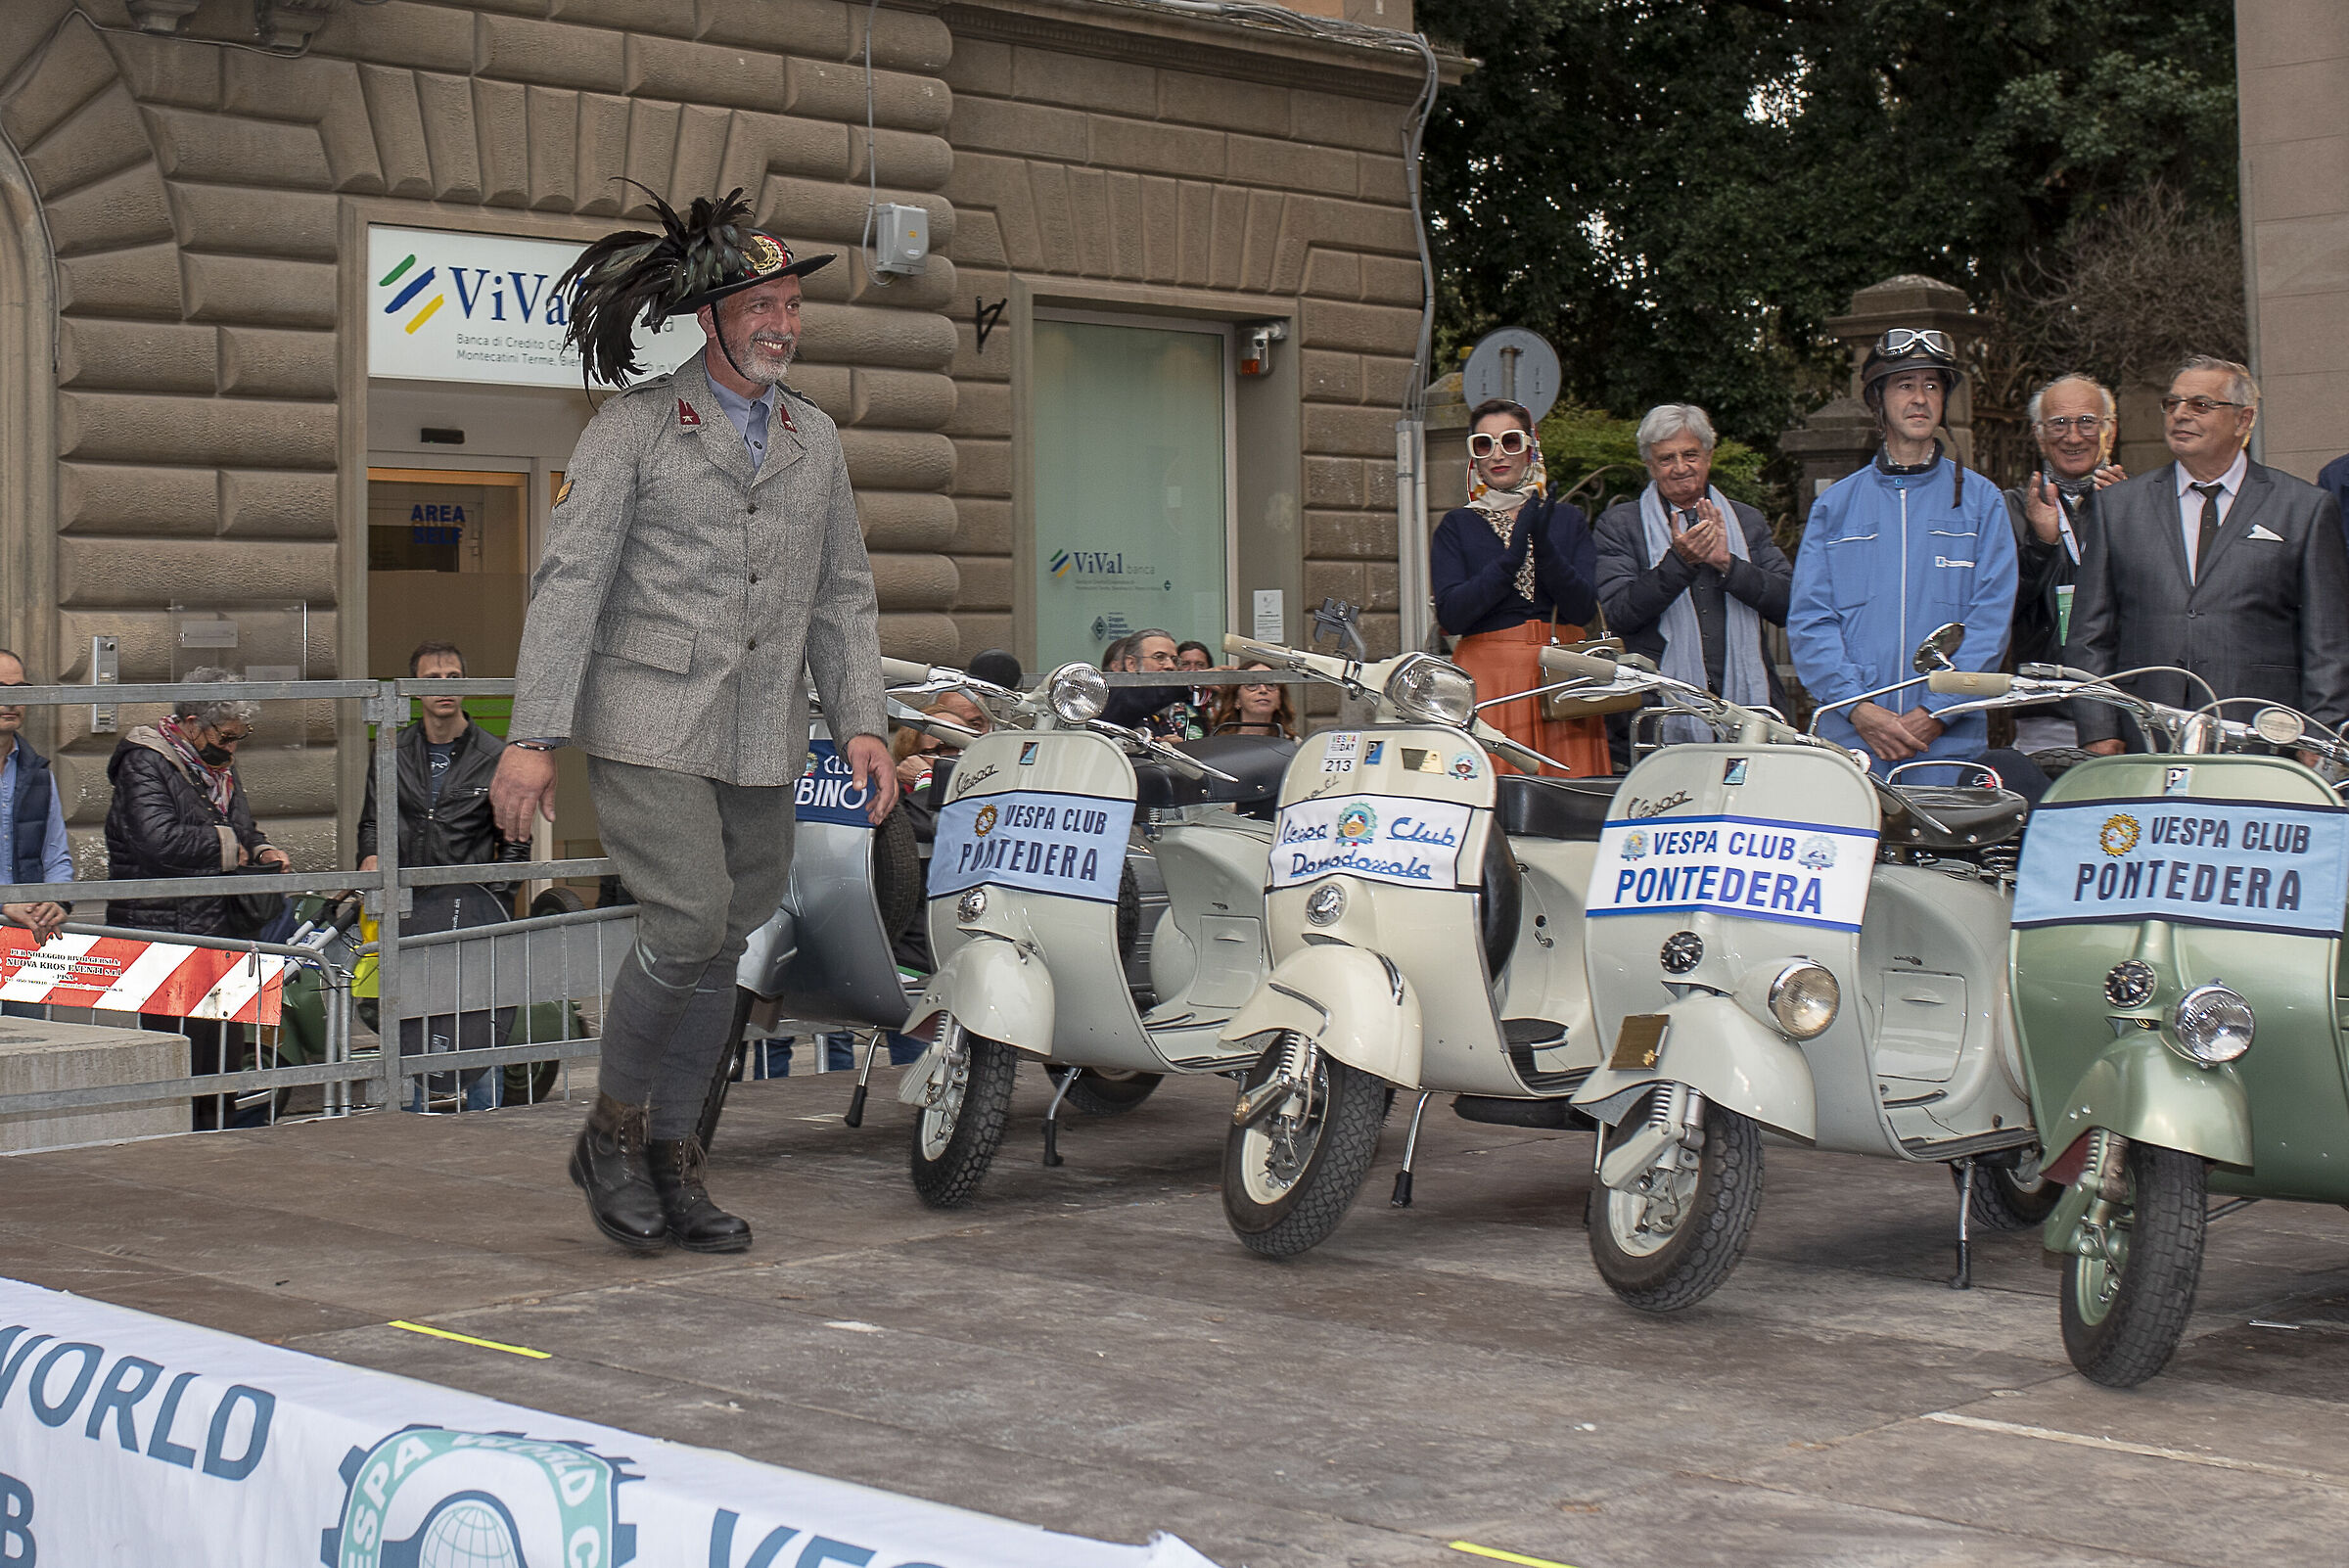 racing with the Vespa...